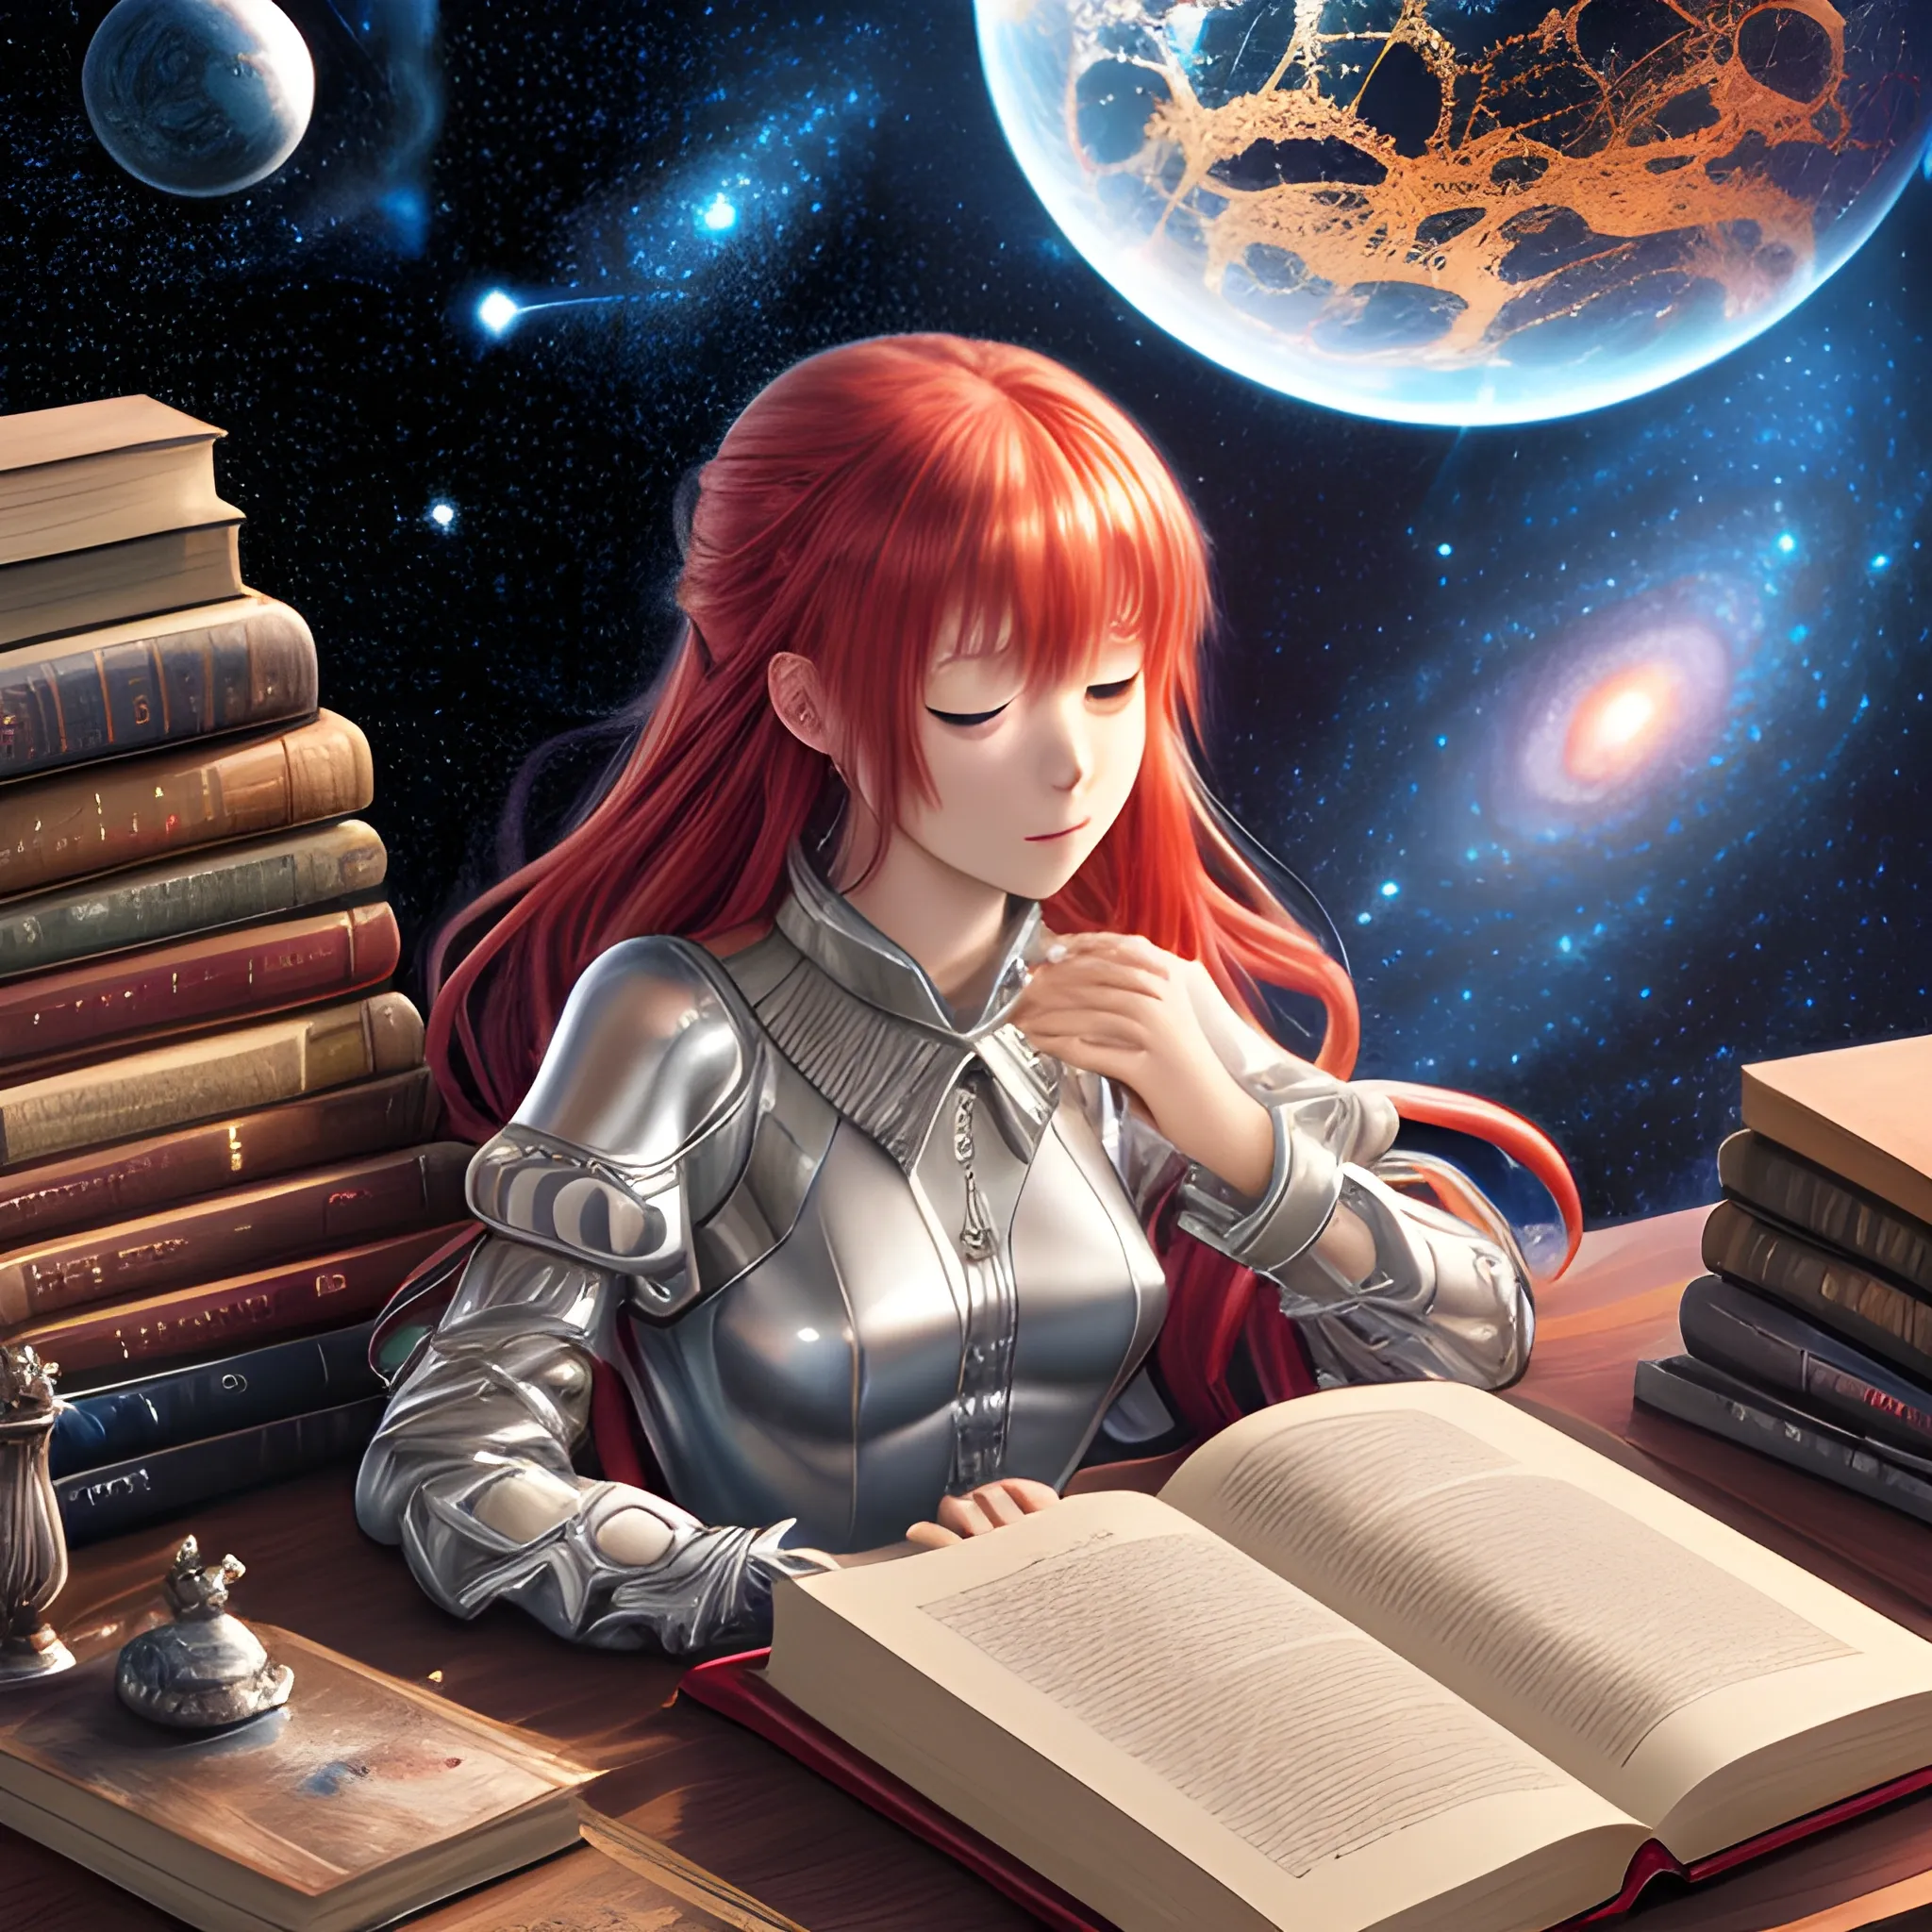 (((high detail))), best quality, (detailed), (high resolution) silver universe, books, books on a table, shelf with some books, studio ghiblin, anime, galaxy in the sky, woman sleeping on it,red hair, red dress
 
, Trippy, 
